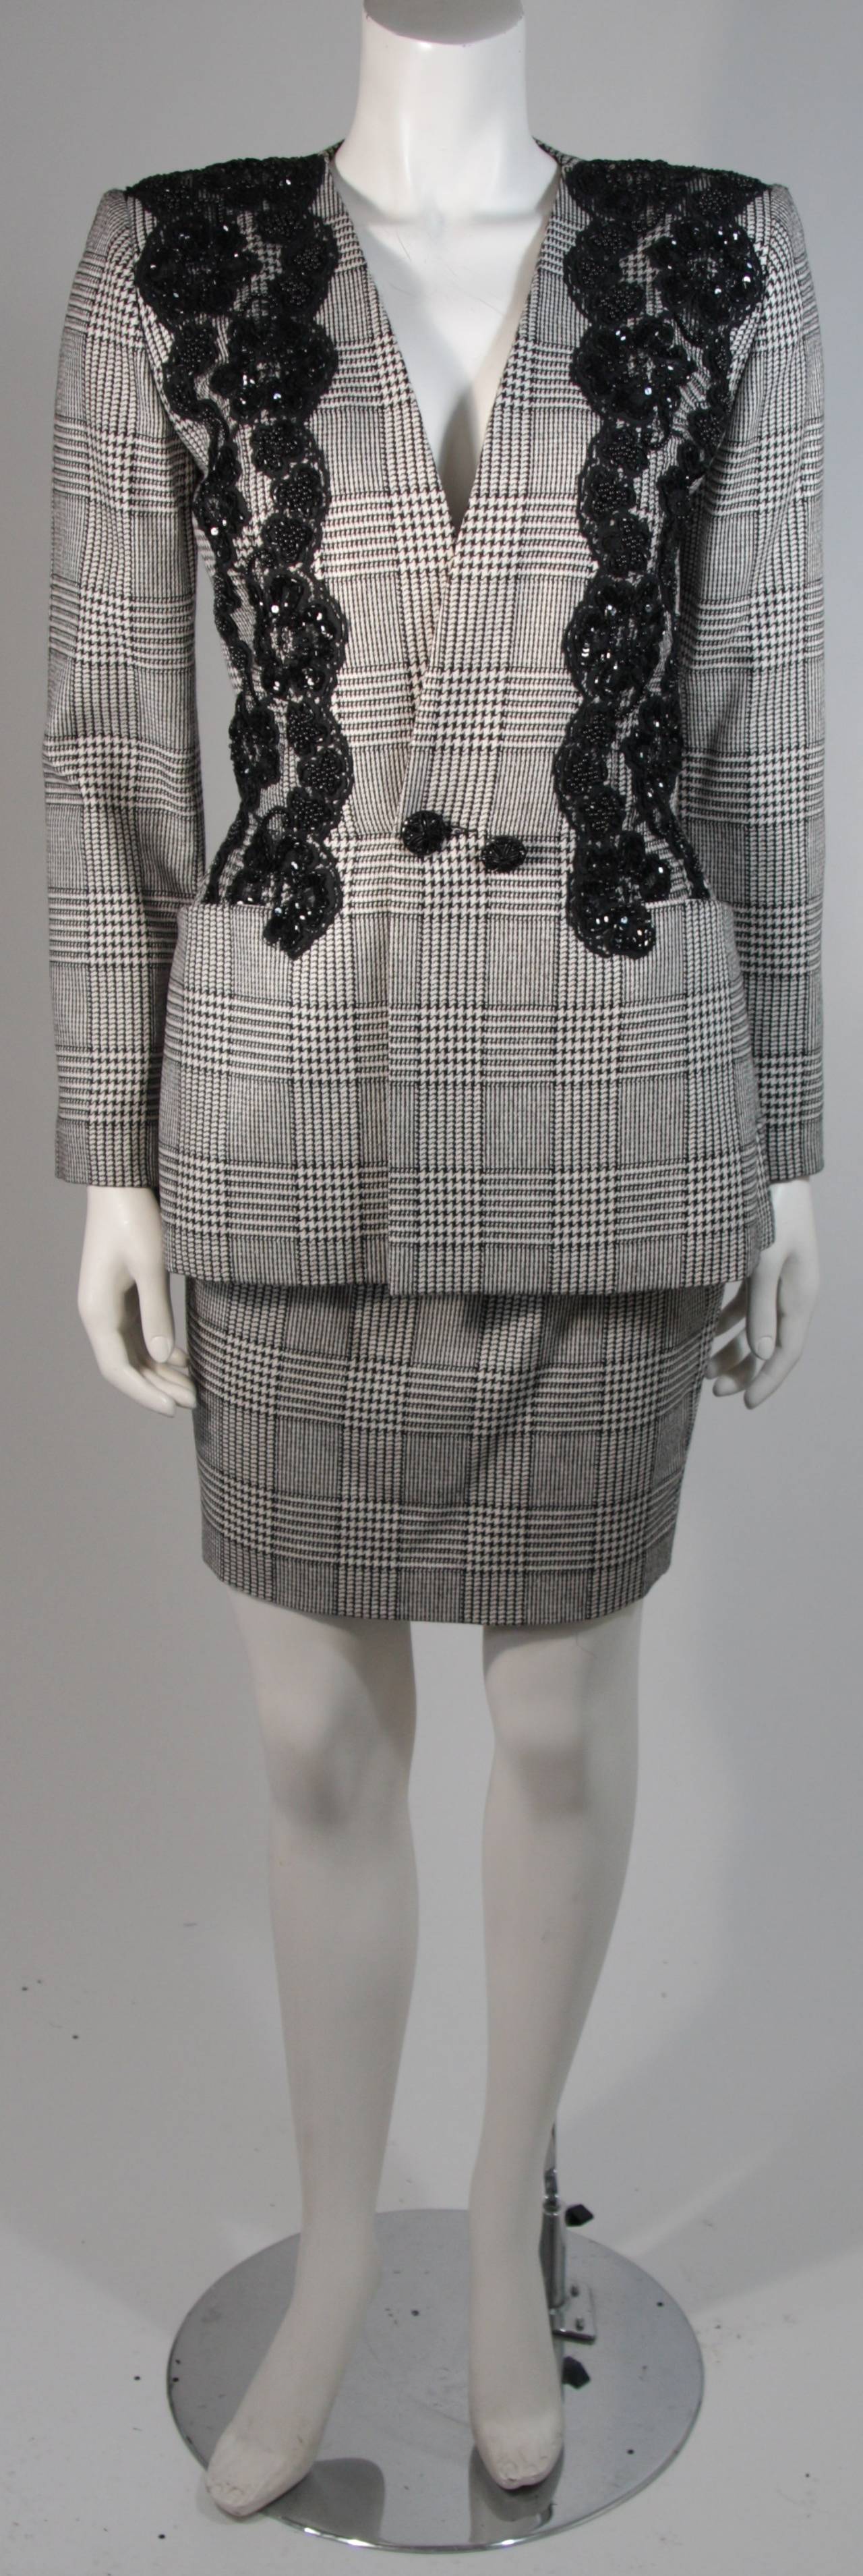 This Vicky Tiel skirt suit is composed of a black and white houndstooth print silk and features beaded lace applique on the jacket. The jacket has a center front button closure and the skirt has a center back zipper closure for ease of access. In